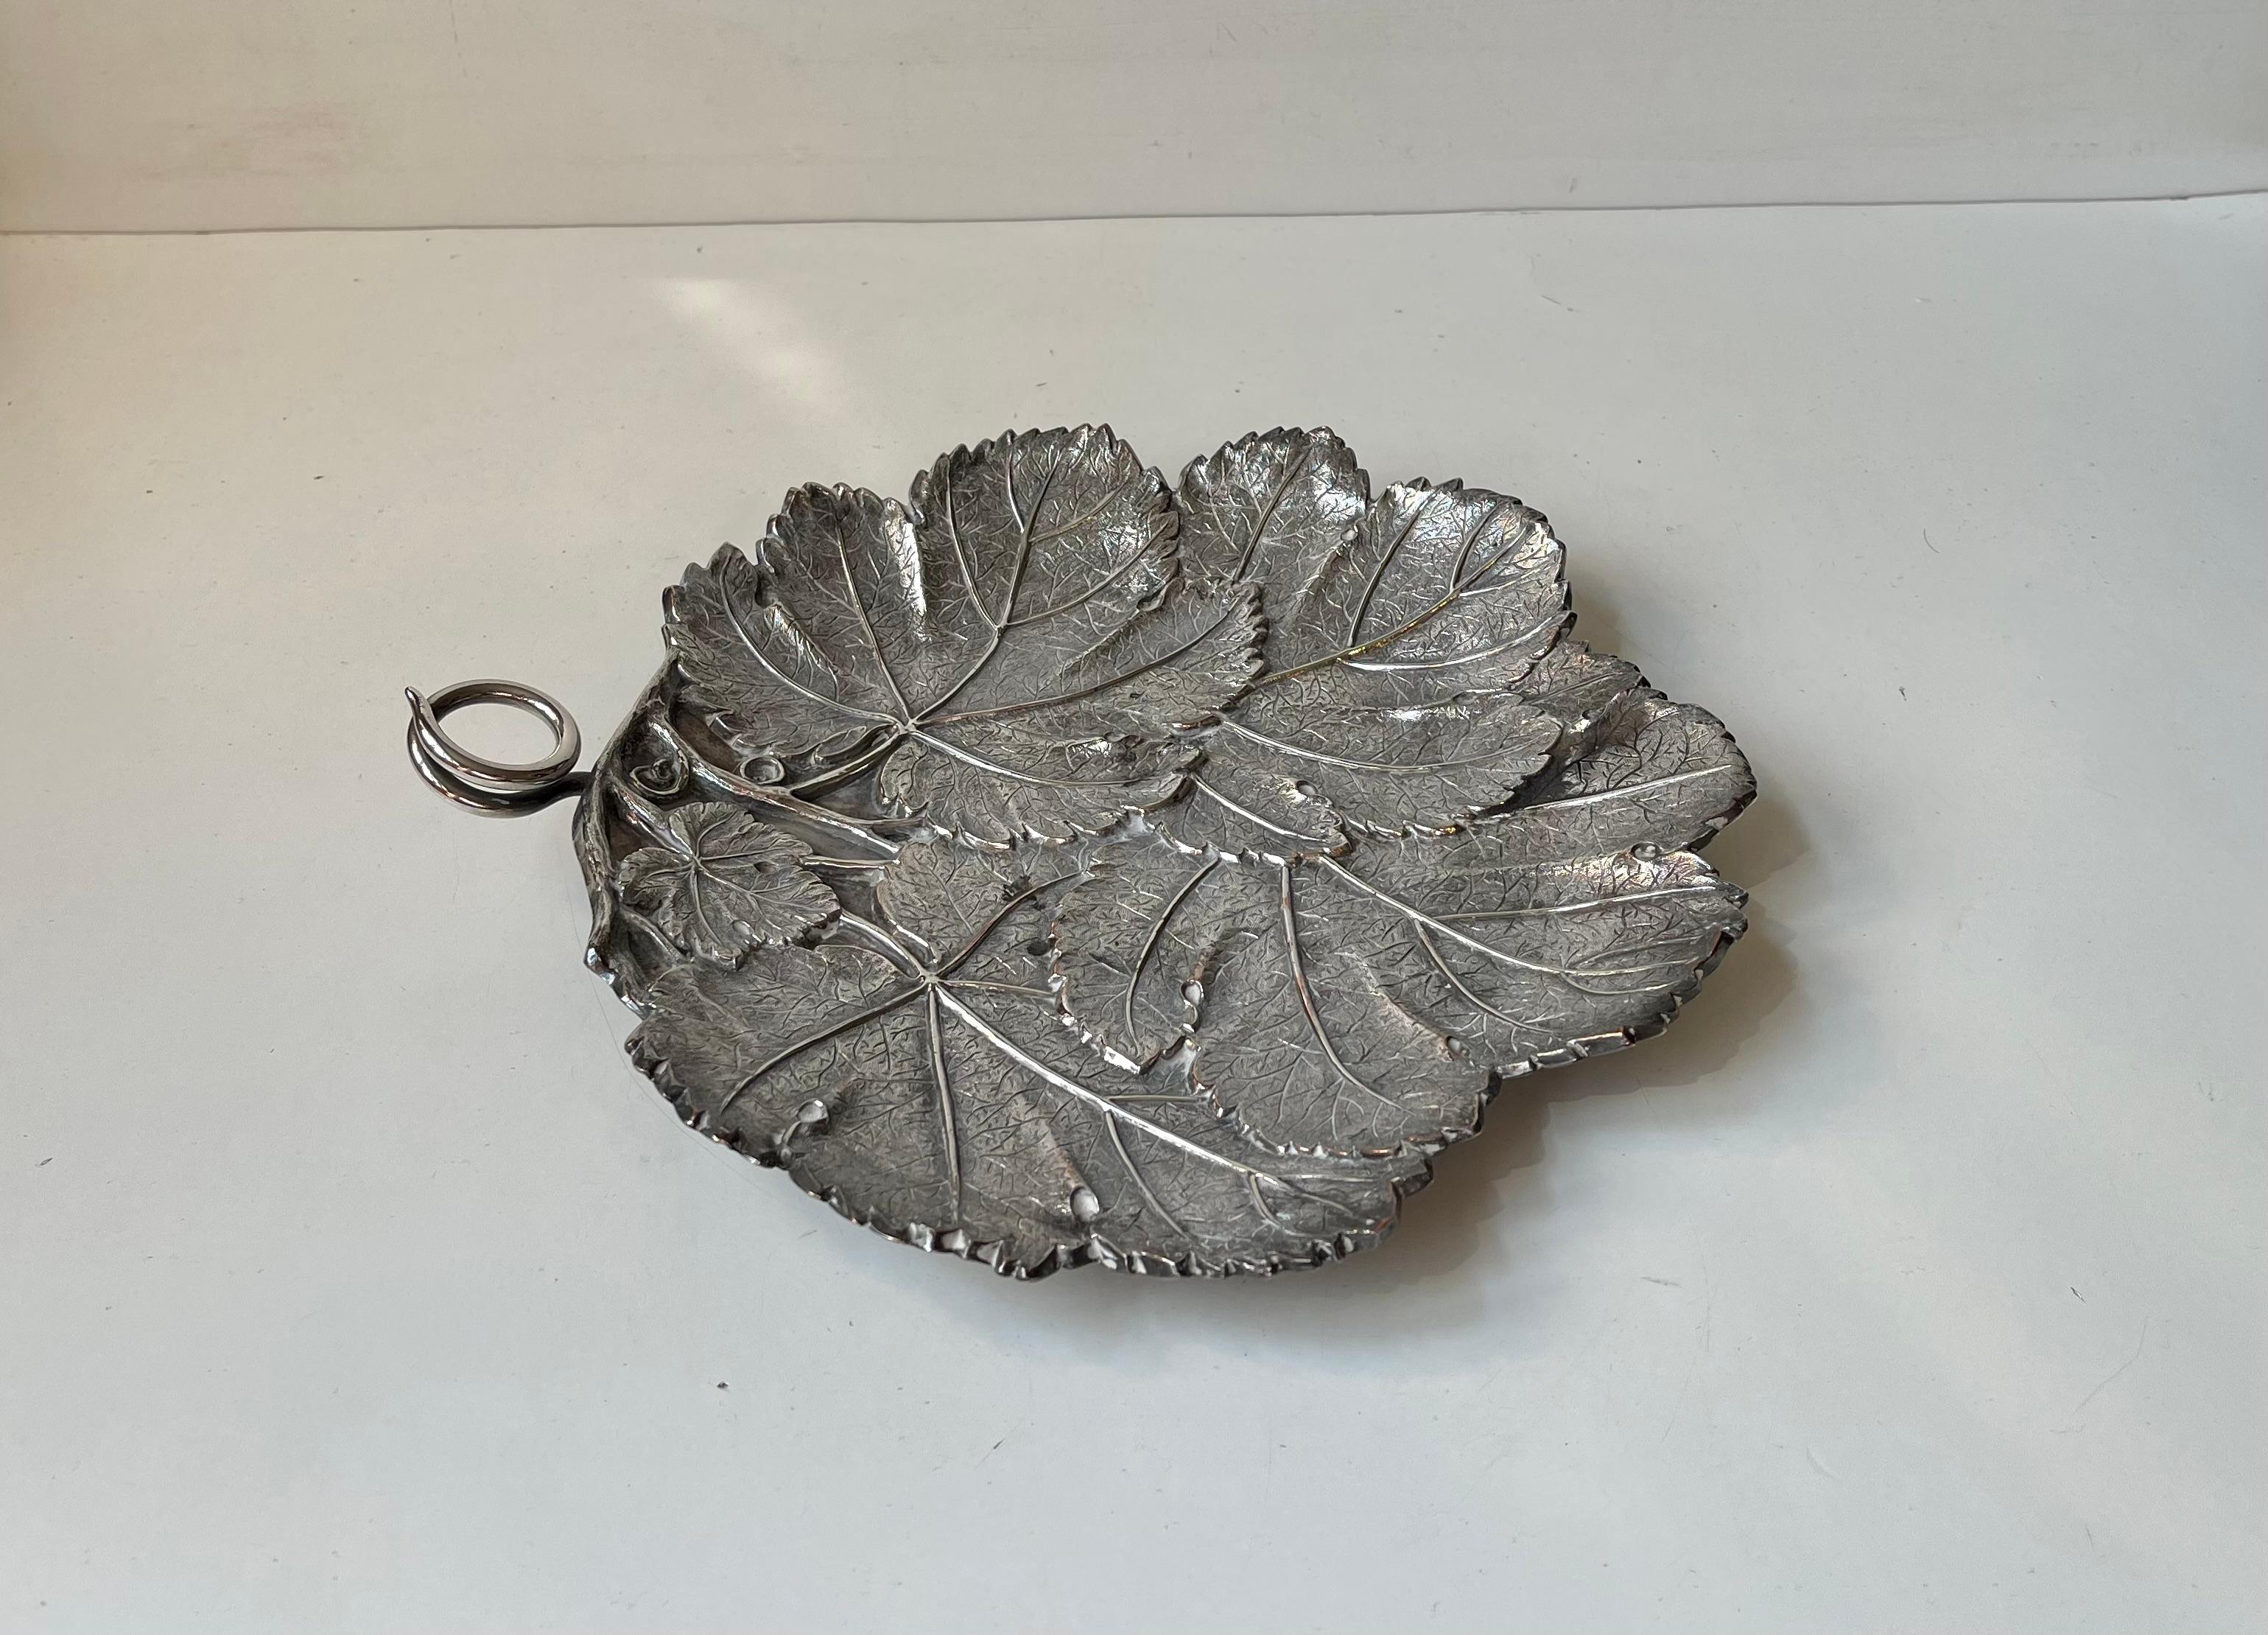 A delicate and naturalistically perceived bowl/dish in sliver plated brass. Entirely micmicing leaves in shape and texture. Small stylized swirling handle. Designed and made at Berg Denmark circa 1950-60 in a style reminiscent of Buccellati.